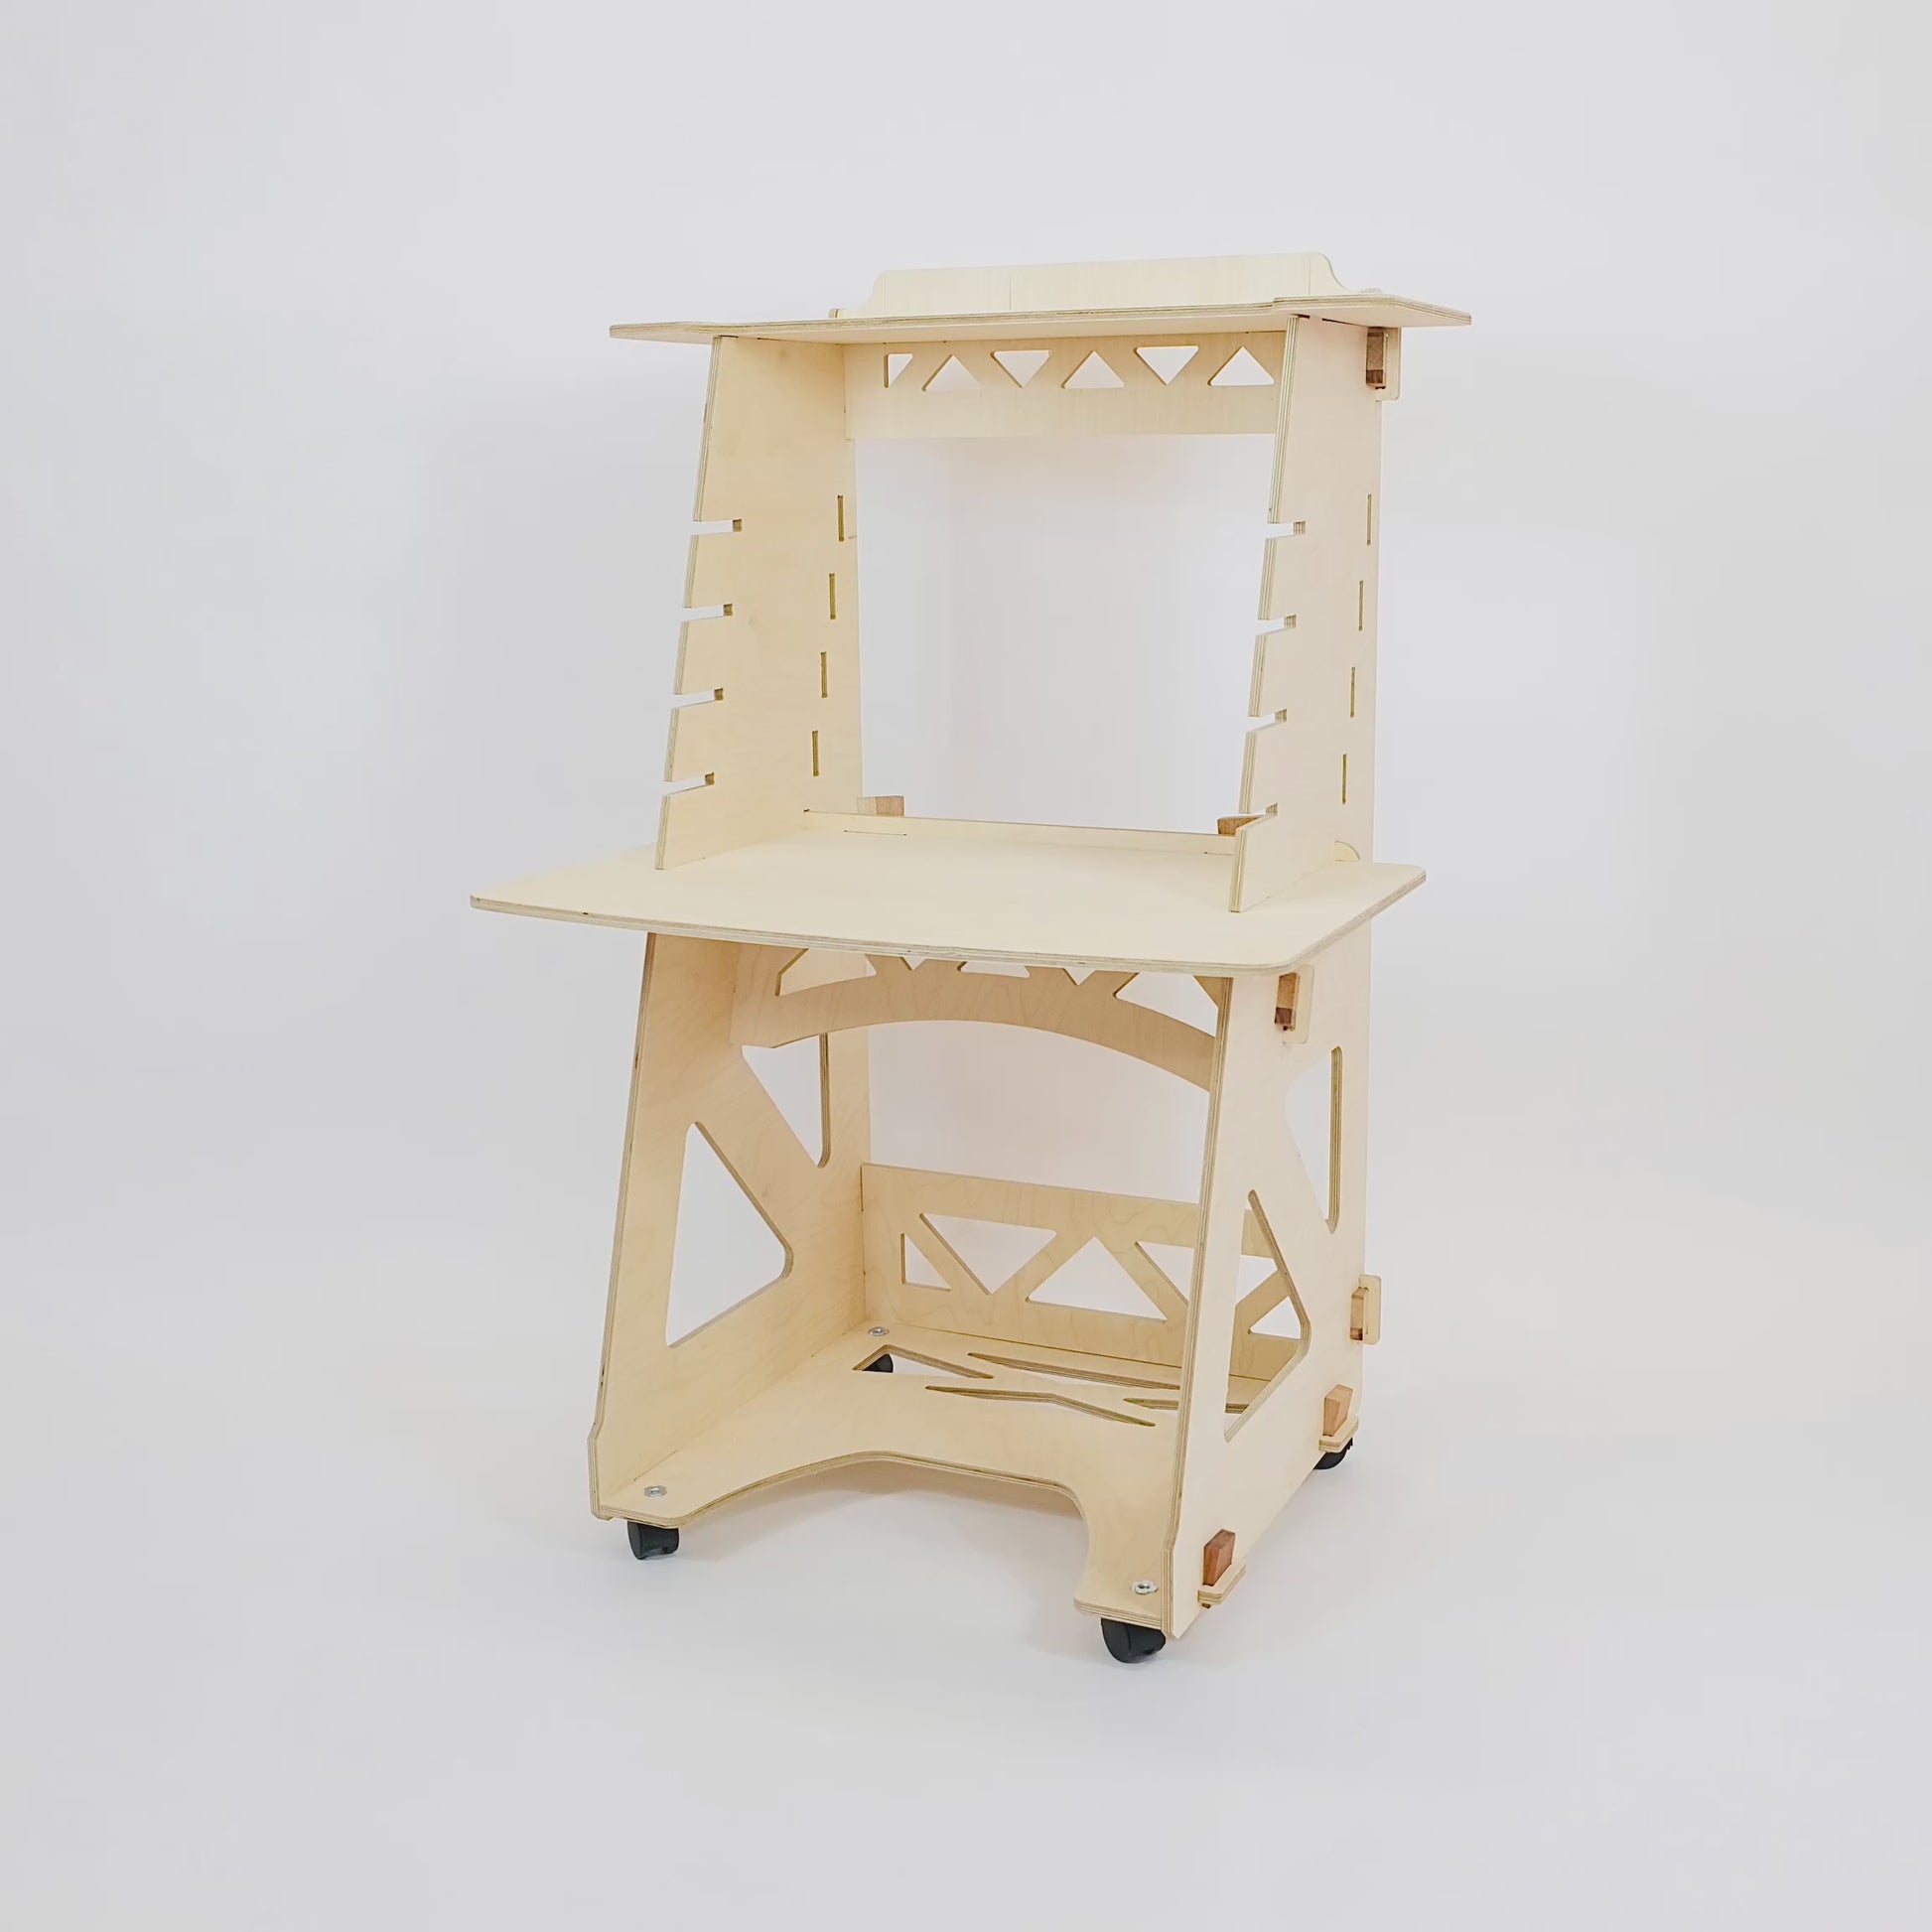 Animation of the different desk heights of a birch plywood stand up/sit down desk against a white wall